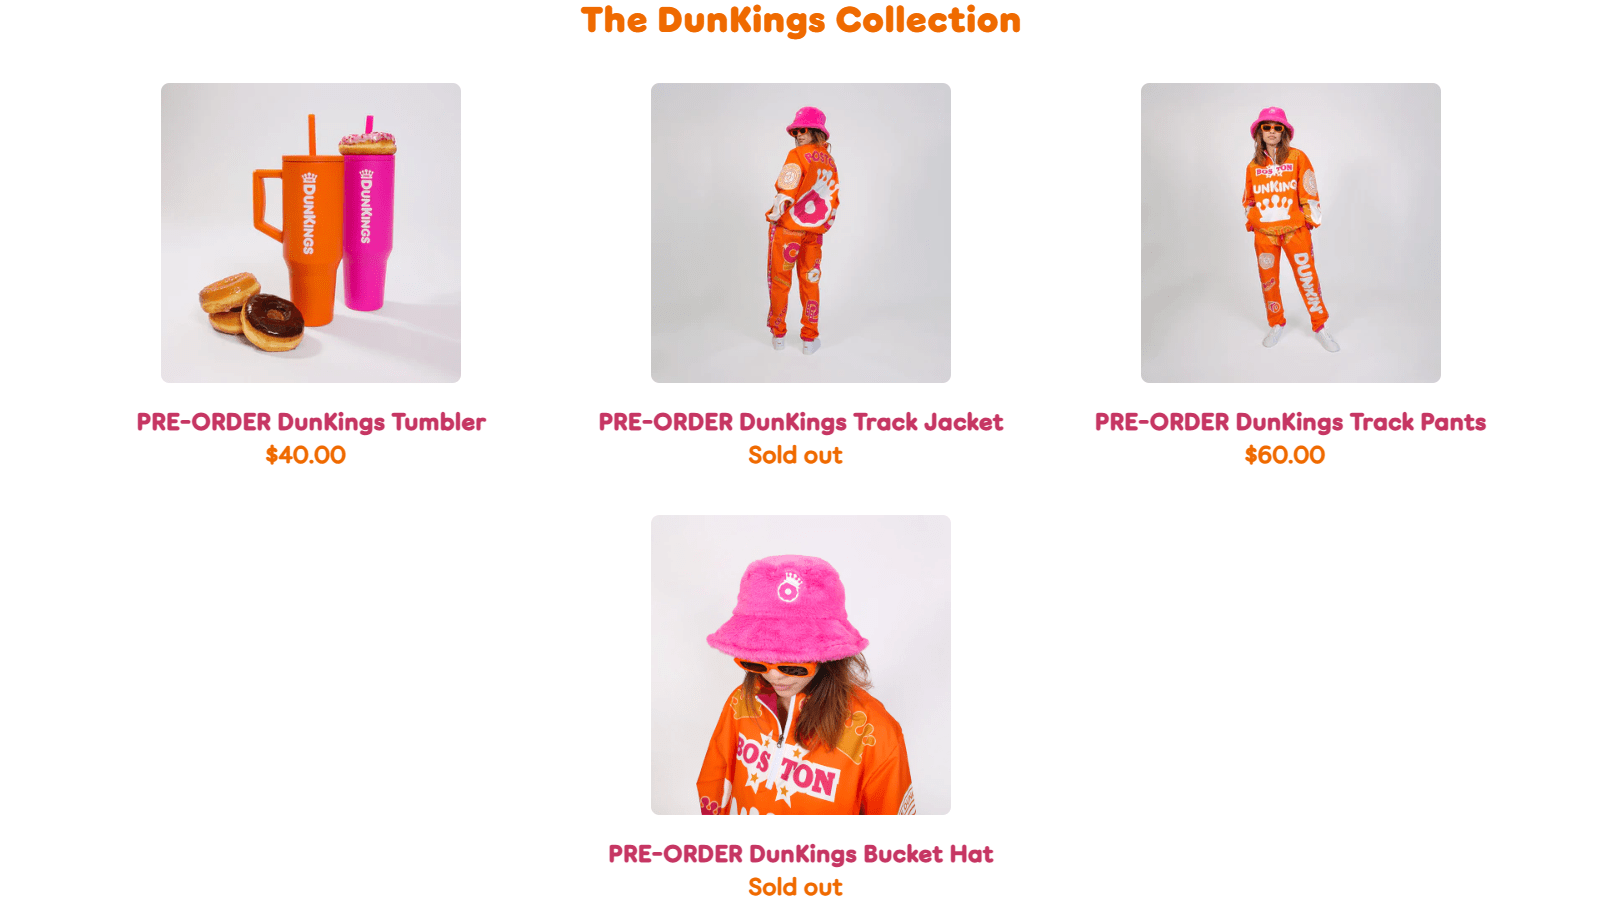 Dunkin Donuts DunKingsCollection